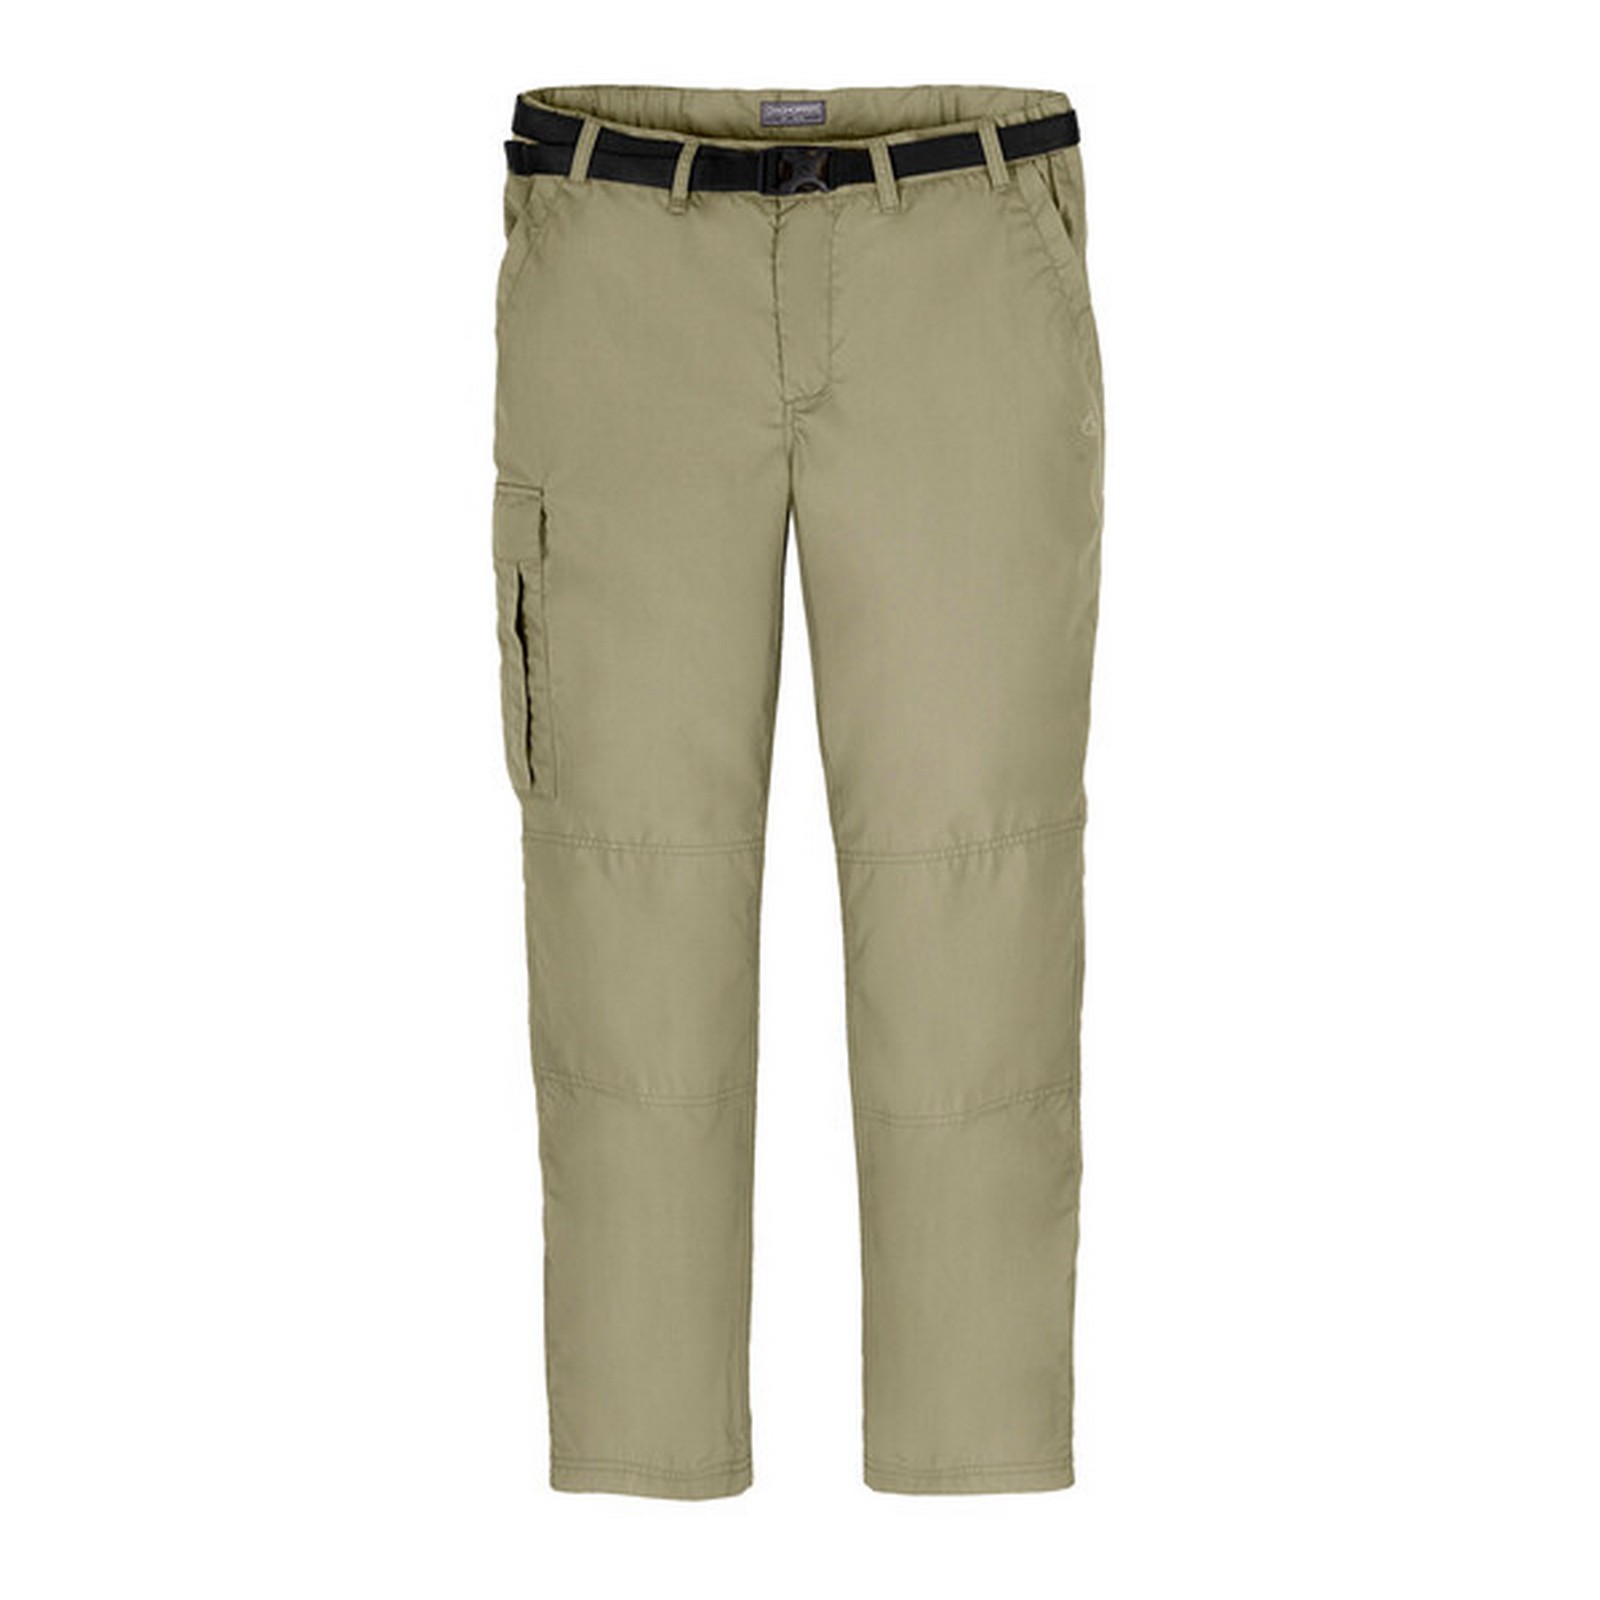 Craghoppers Kiwi Classic trousers | WISE Worksafe